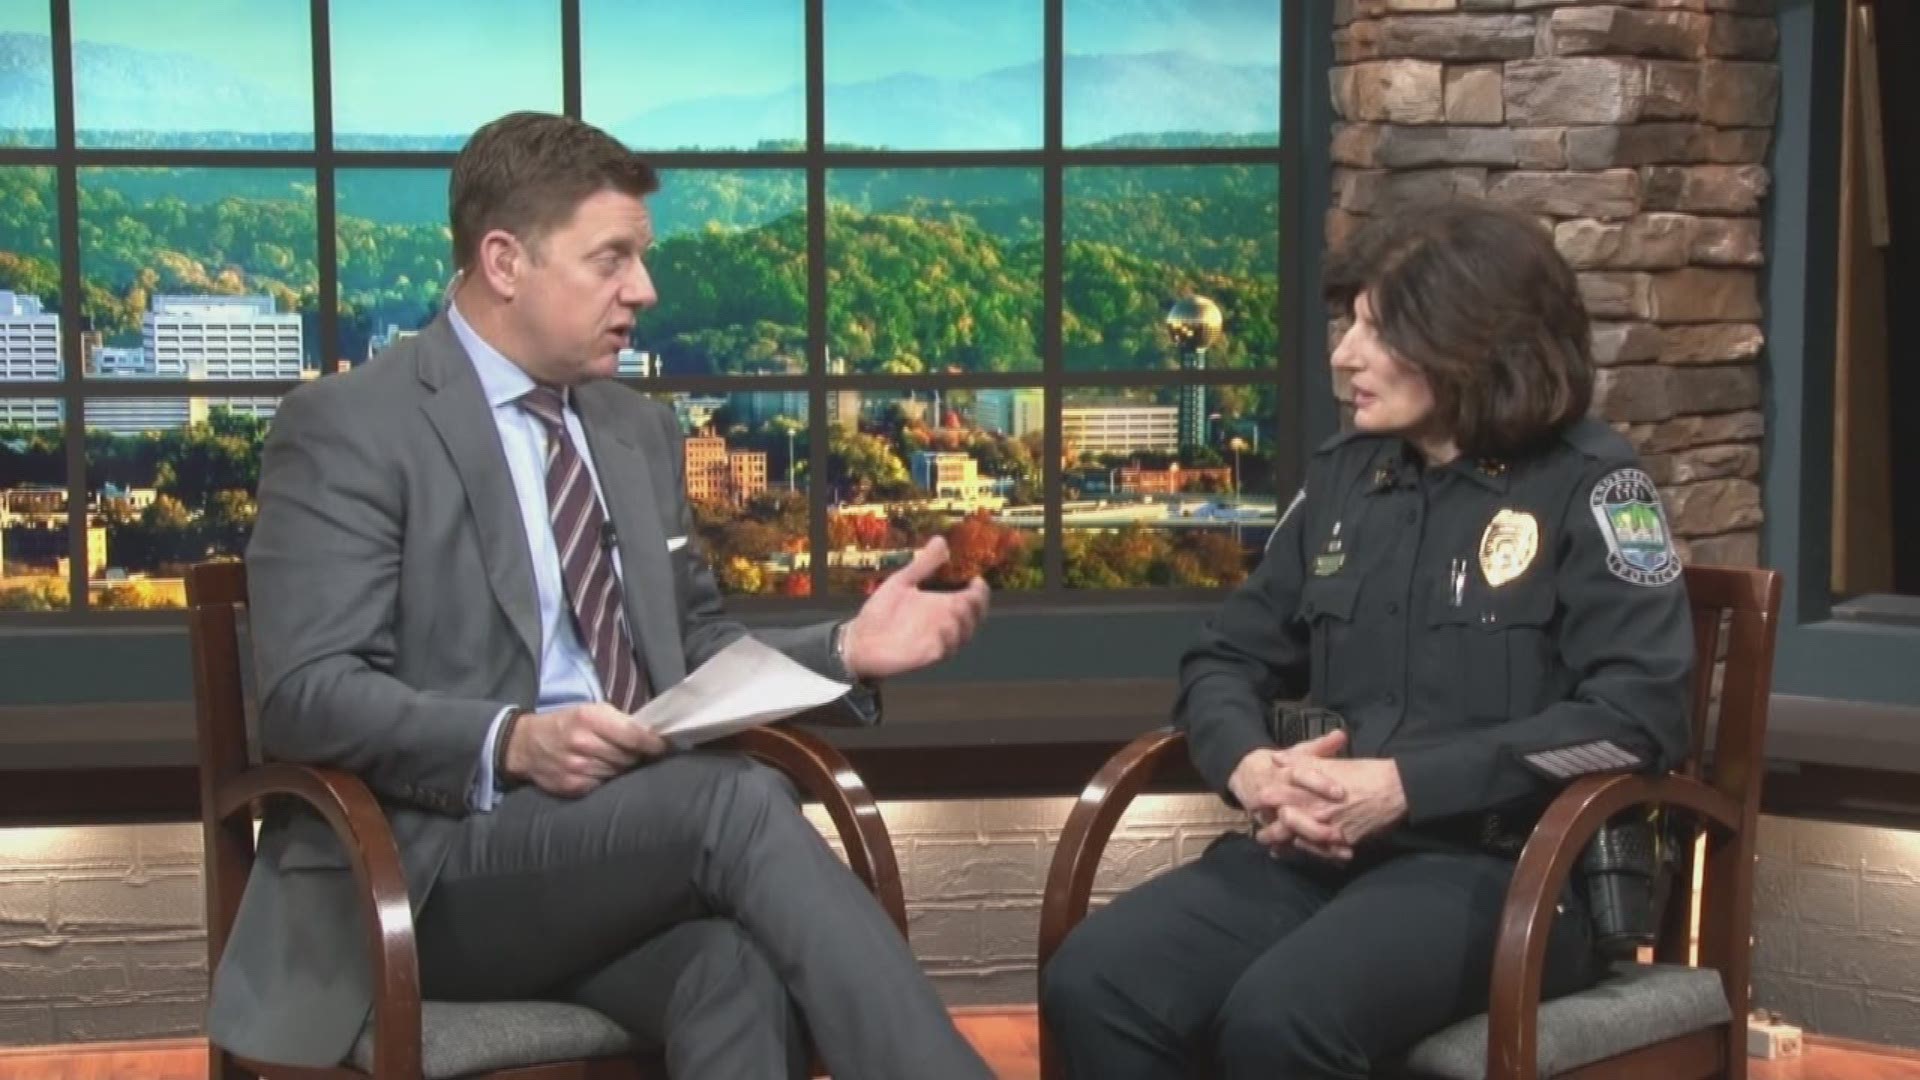 KPD Chief Eve Thomas talks about leading the department.